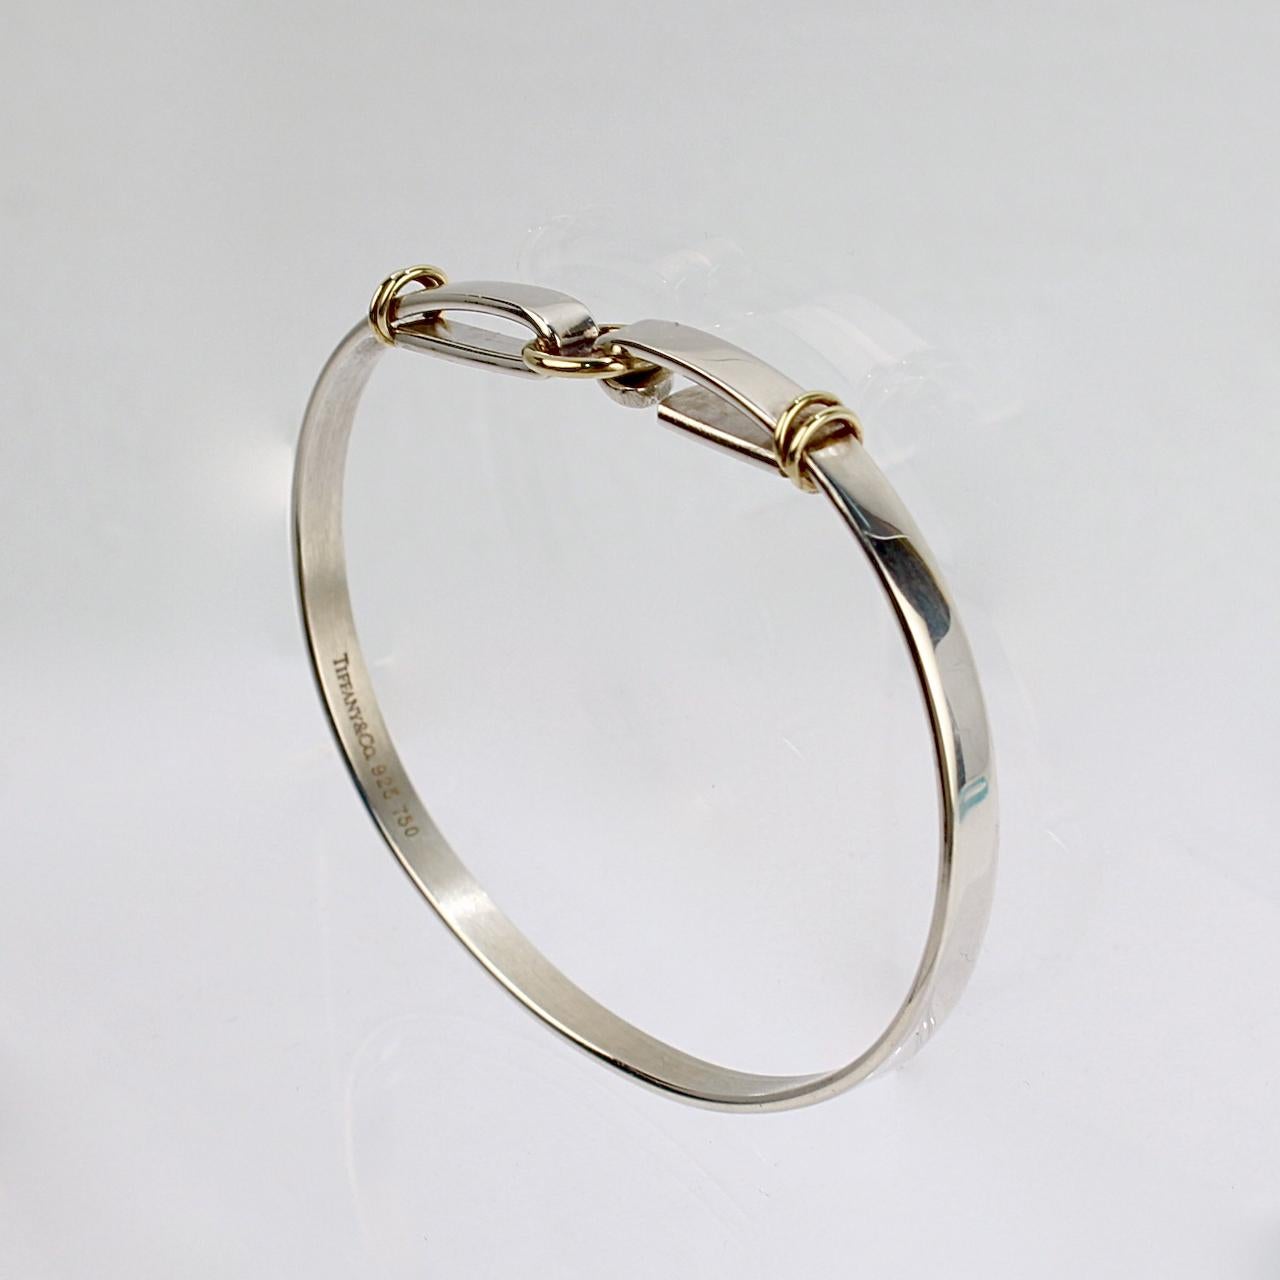 A fine Tiffany & Co. bracelet.

In sterling silver and 18 karat gold.

With a hook and circle closure.

Together with its original Tiffany box.

Simply great Tiffany design!

Date:
20th Century

Overall Condition:
It is in overall good, as-pictured,